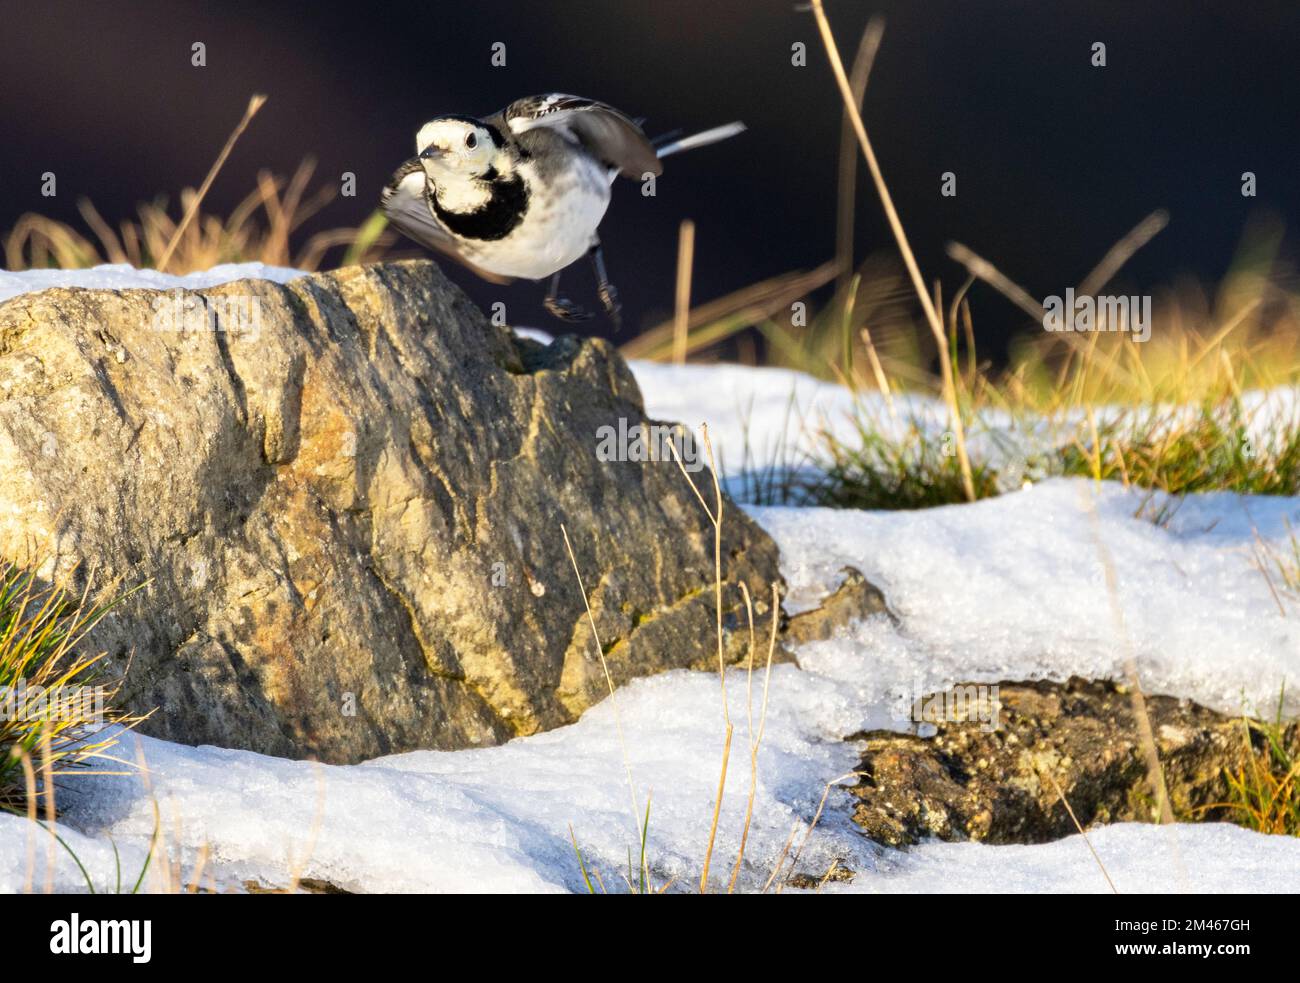 The Pied or White Wagtail is often found near water. They are active birds that constantly bob their tails as they walk in search of invertebrate food Stock Photo